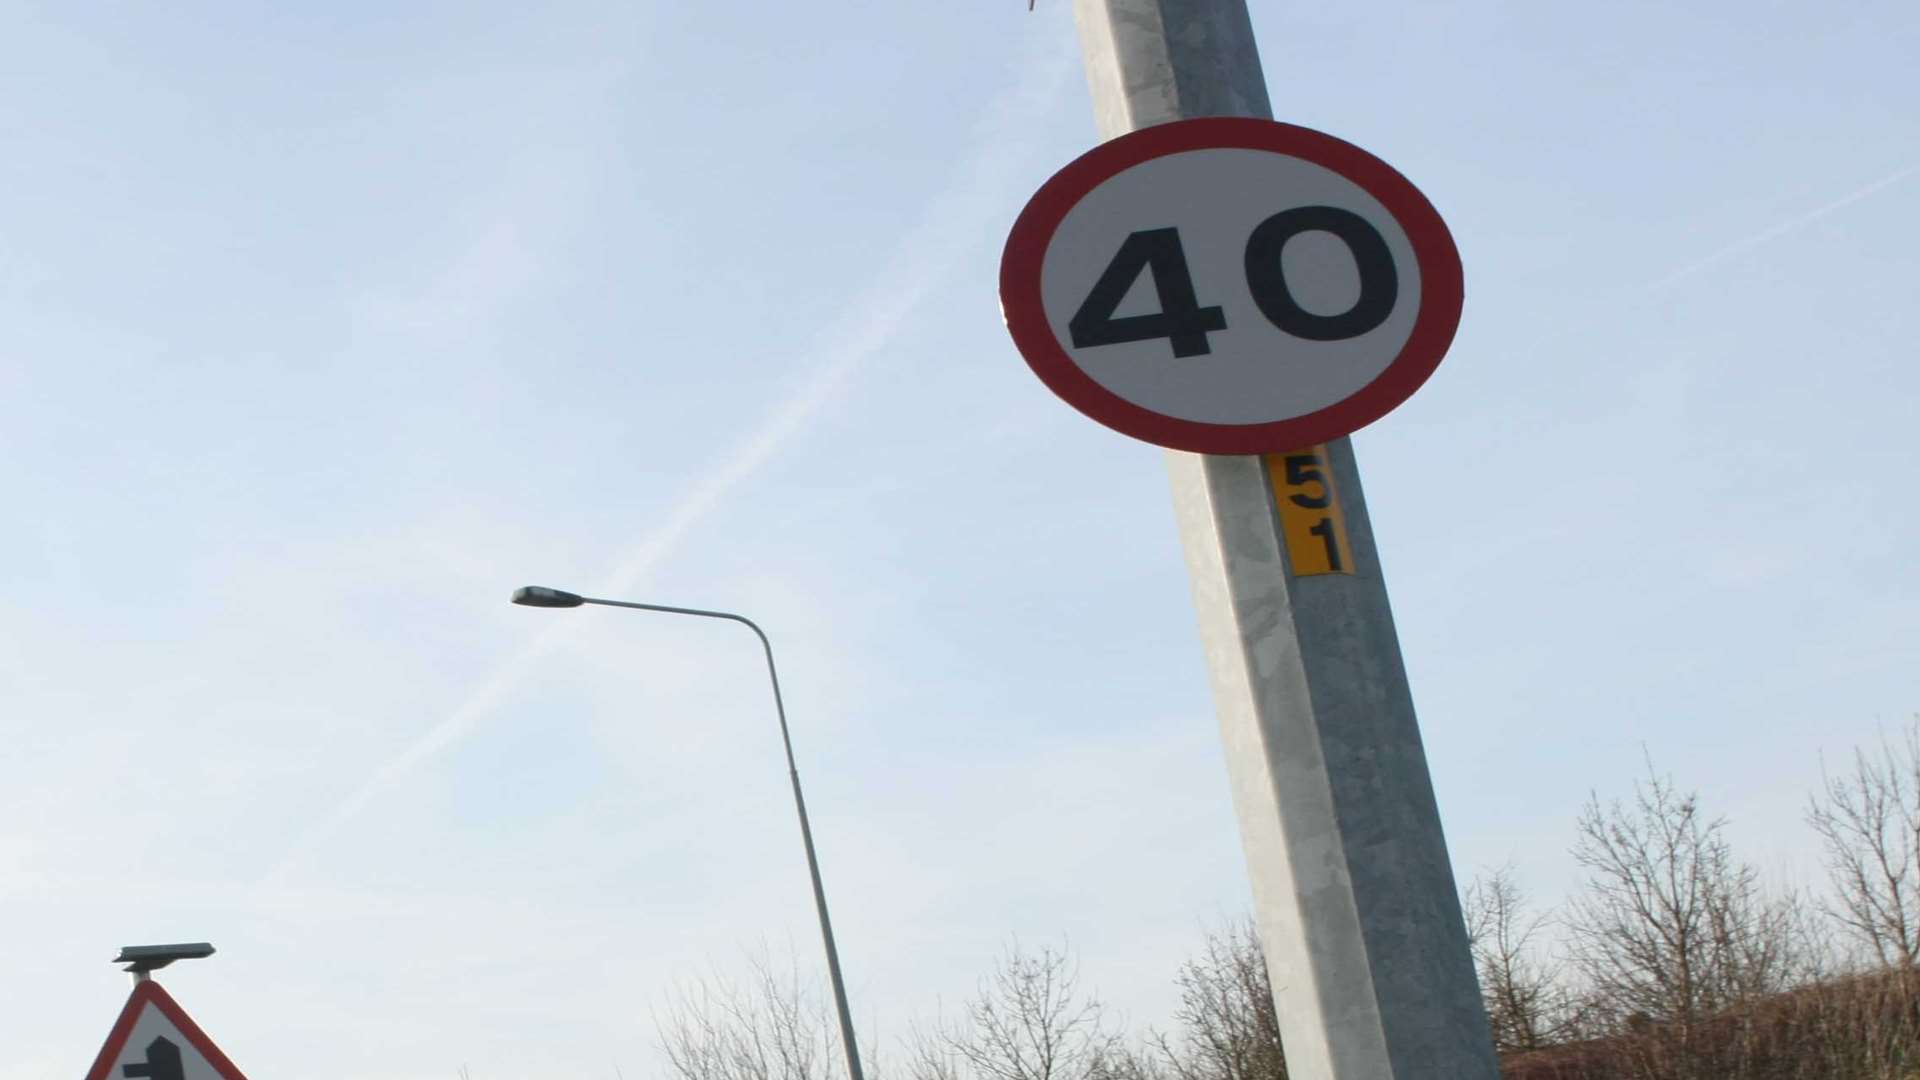 Hildenborough Parish Council is pushing for speed limits on rural roads to be lowered